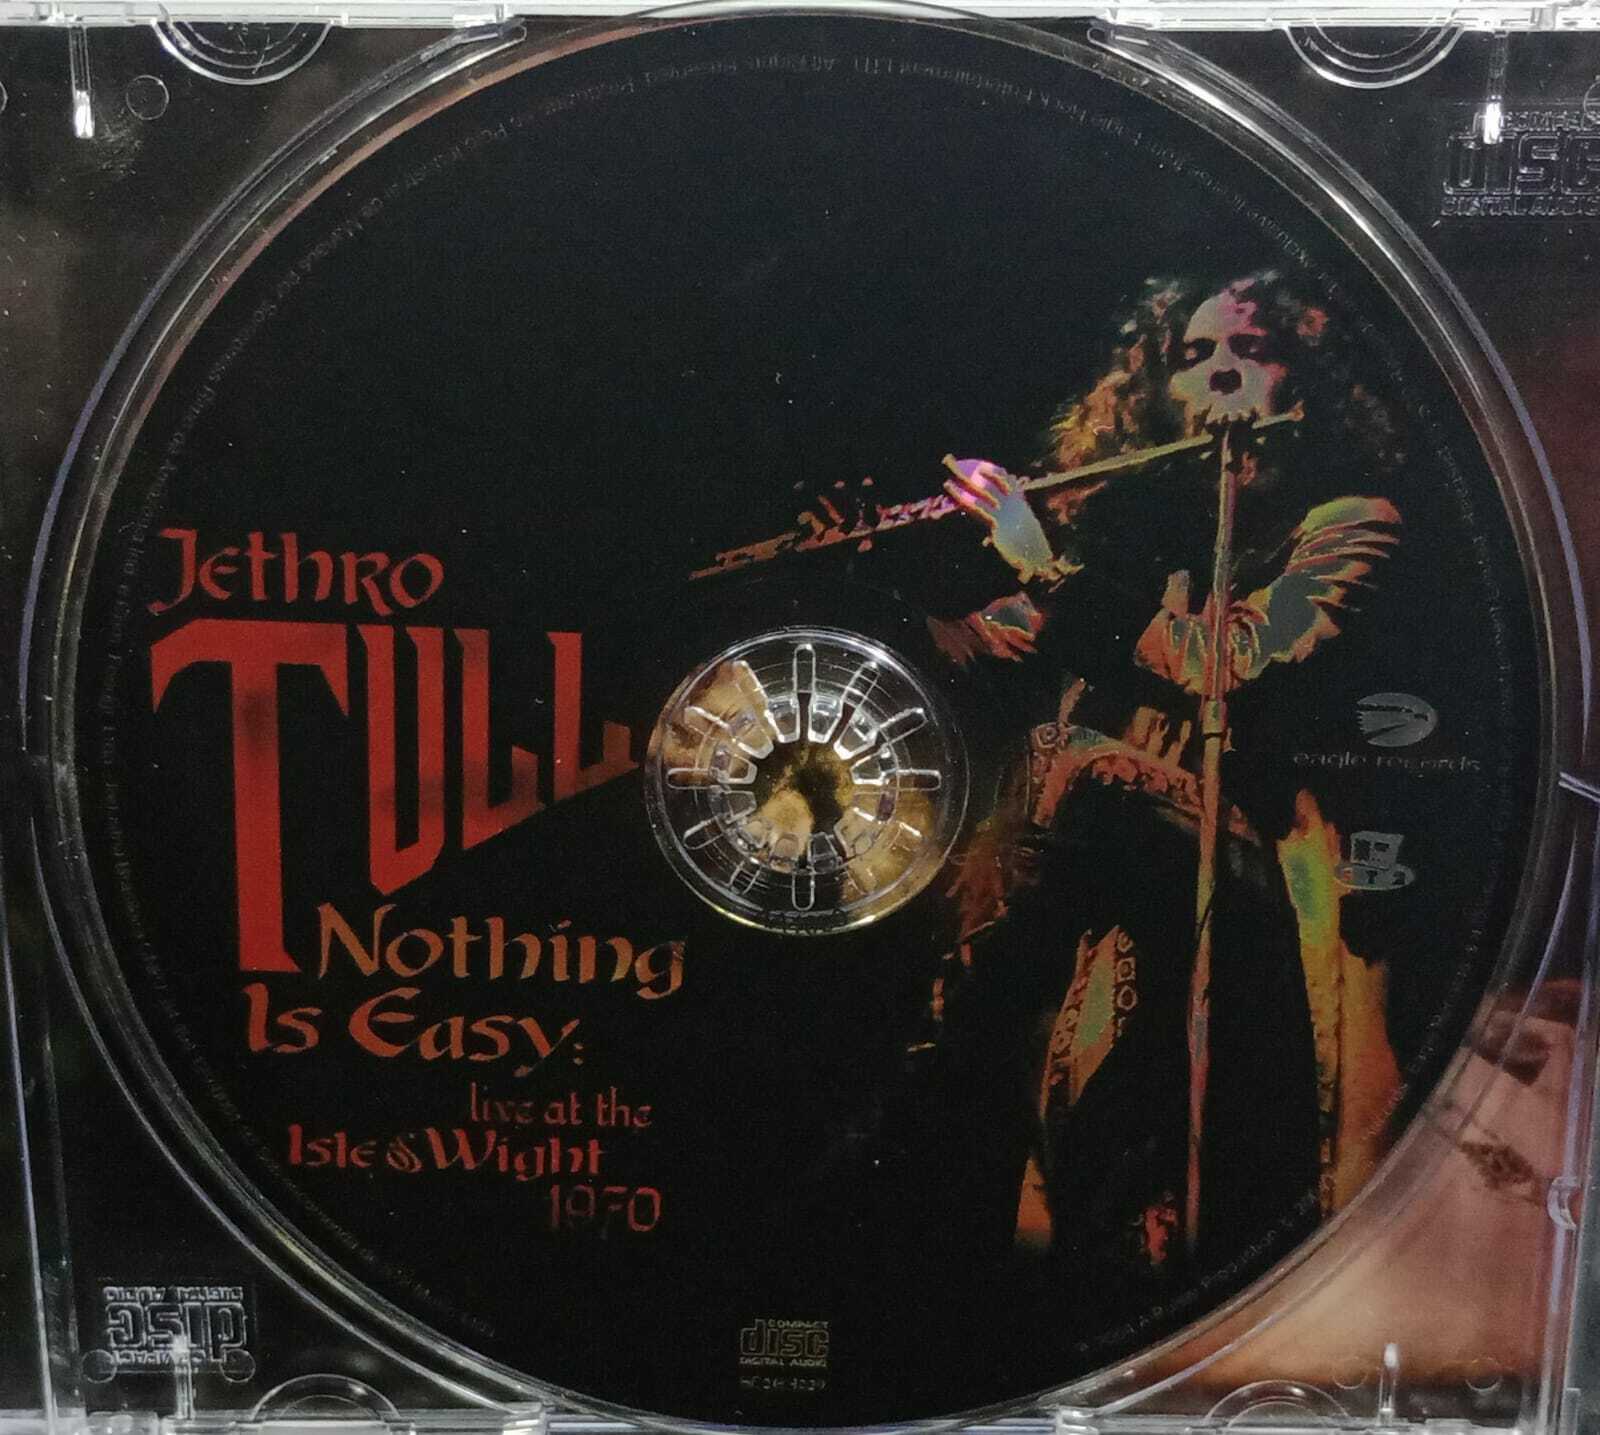 CD - Jethro Tull - Nothing is Easy live at Isle of Wight 1970